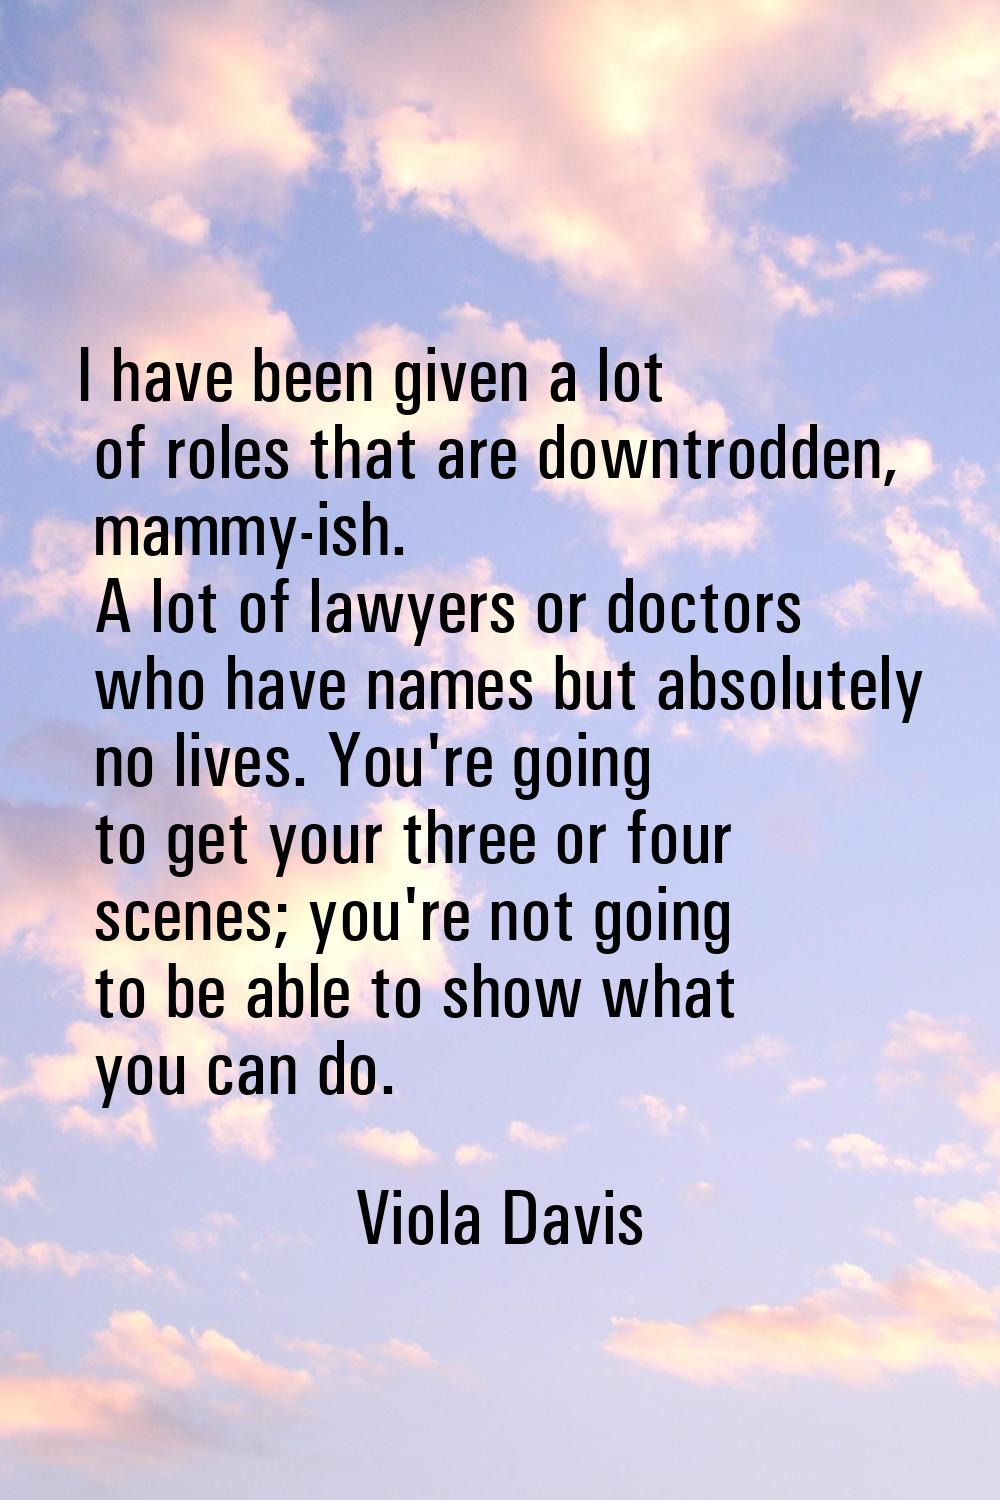 I have been given a lot of roles that are downtrodden, mammy-ish. A lot of lawyers or doctors who h